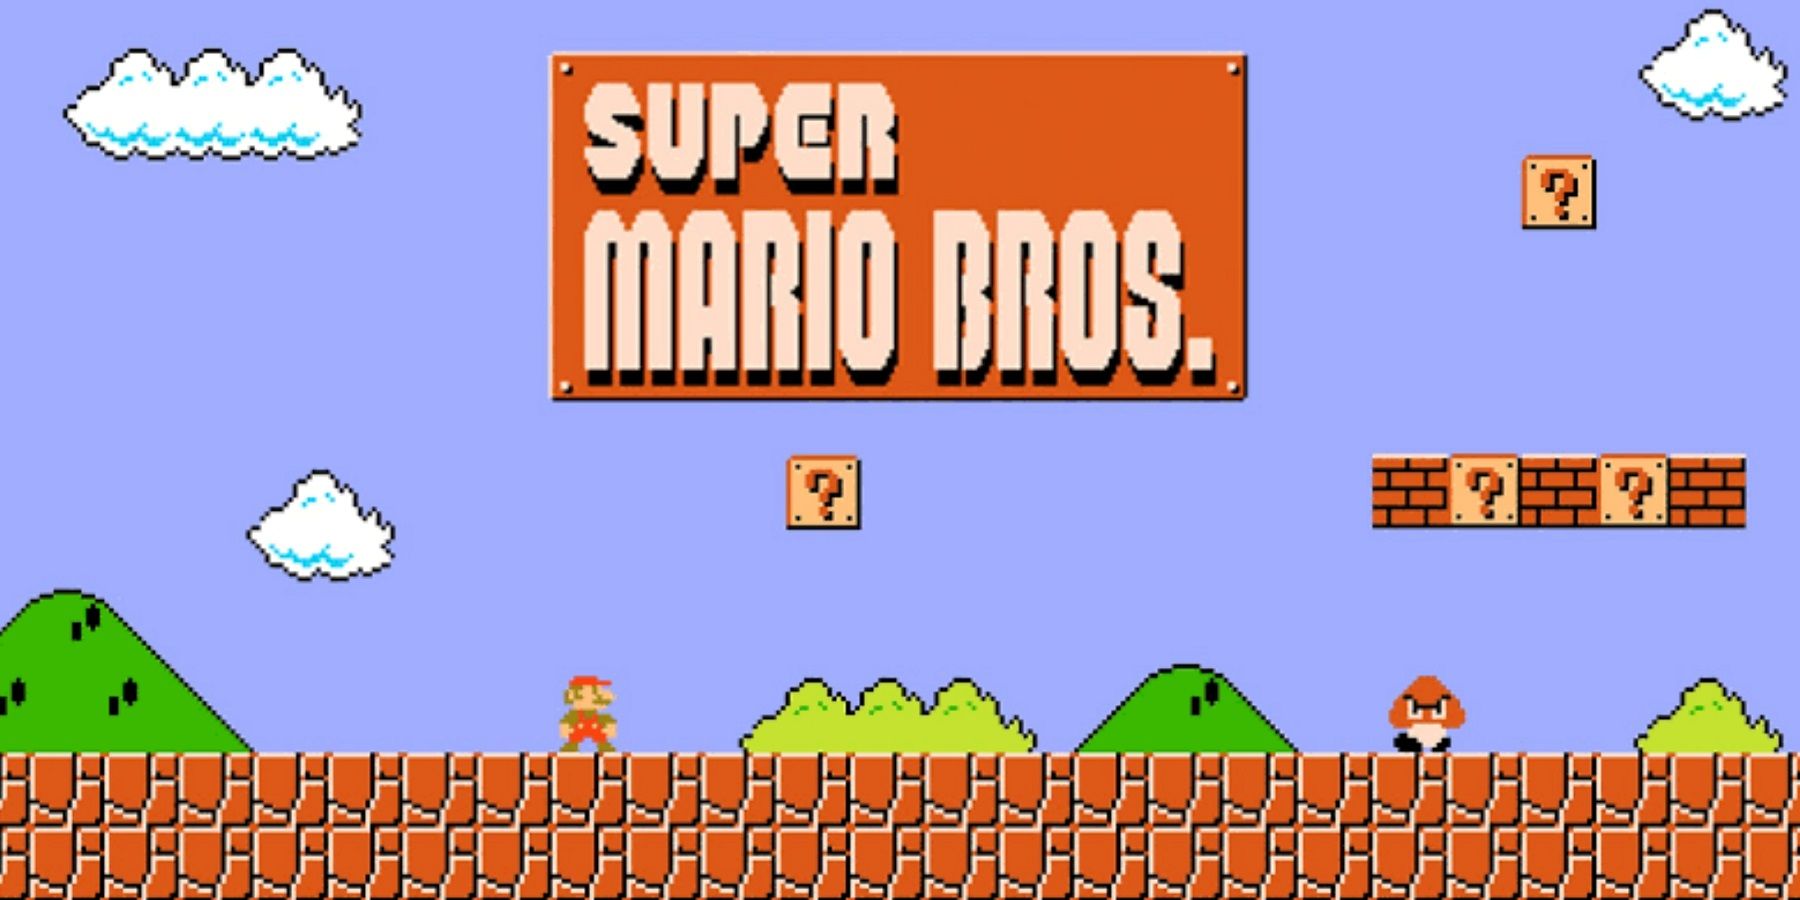 Screenshot from Super Marios Bros. on the NEs showing Mario and a goomba.